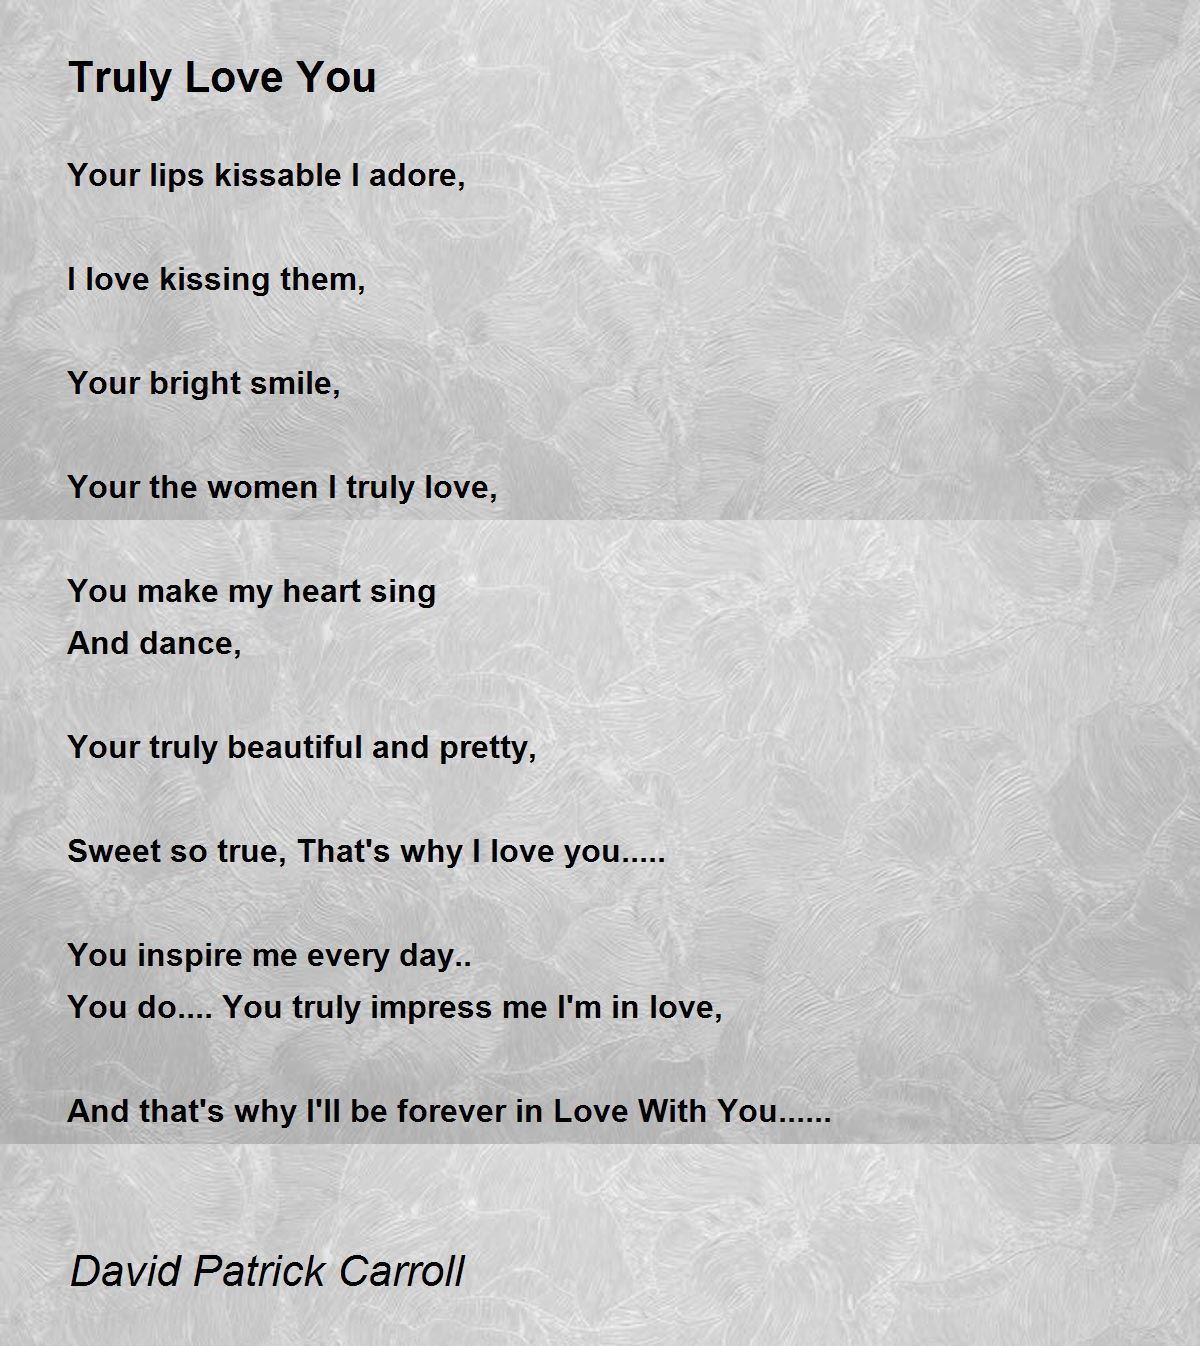 Truly Love You by David P Carroll - Truly Love You Poem